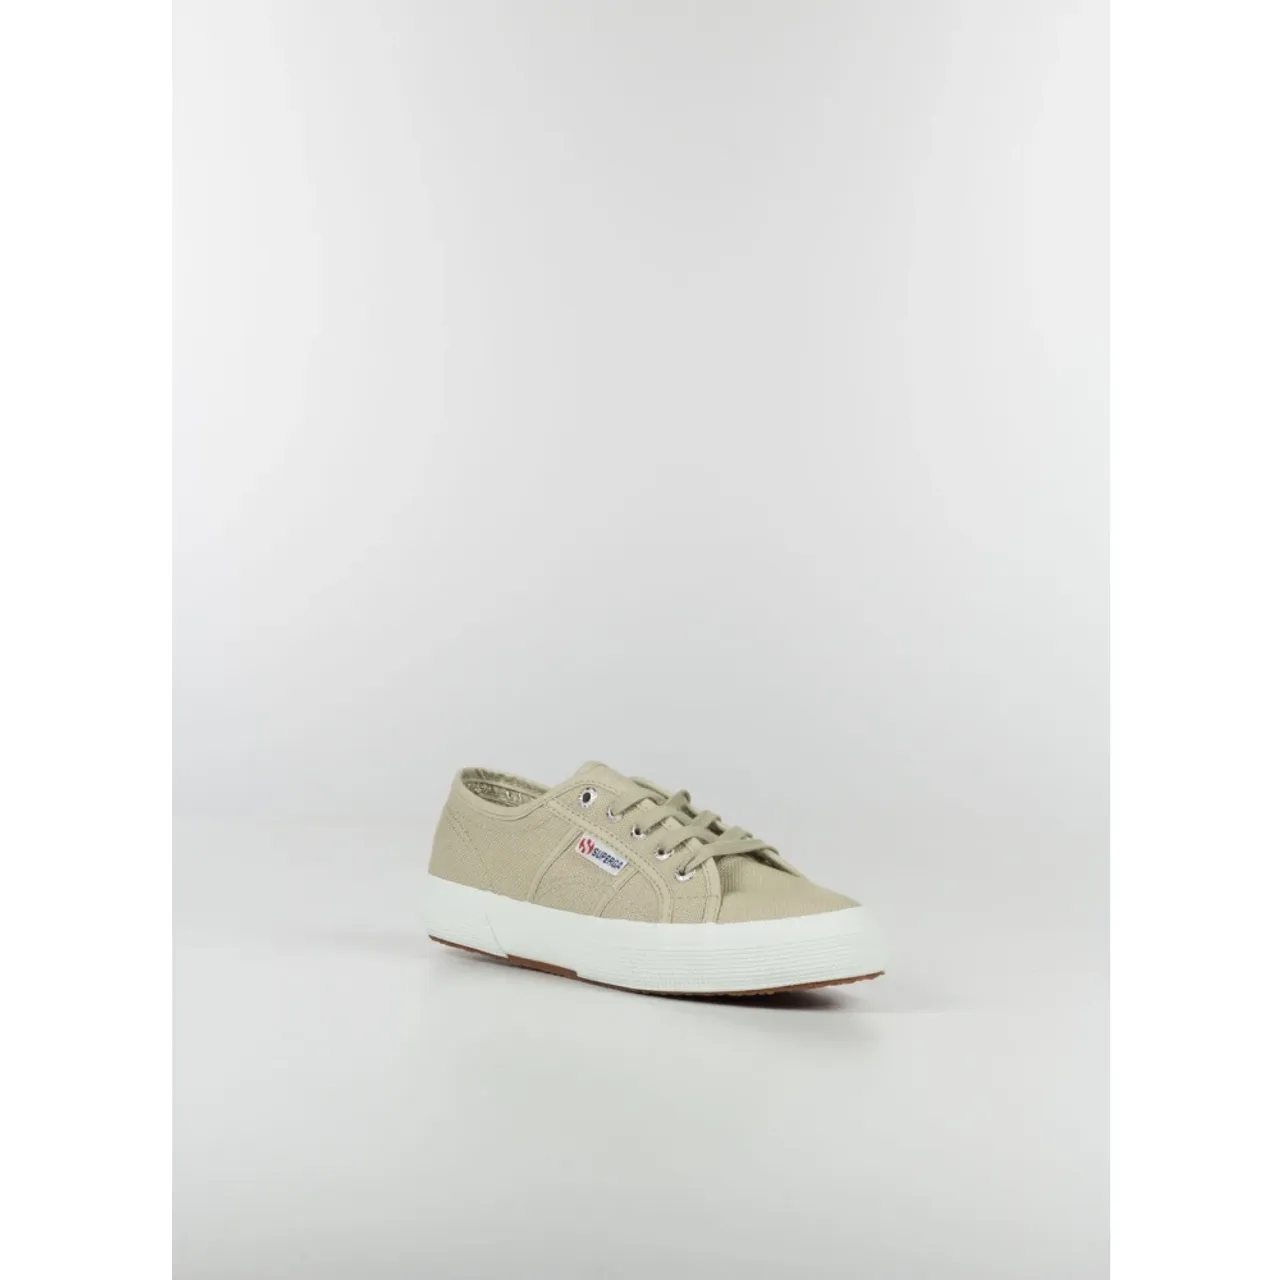 Superga , Classic Canvas Sneakers ,Beige male, Sizes: